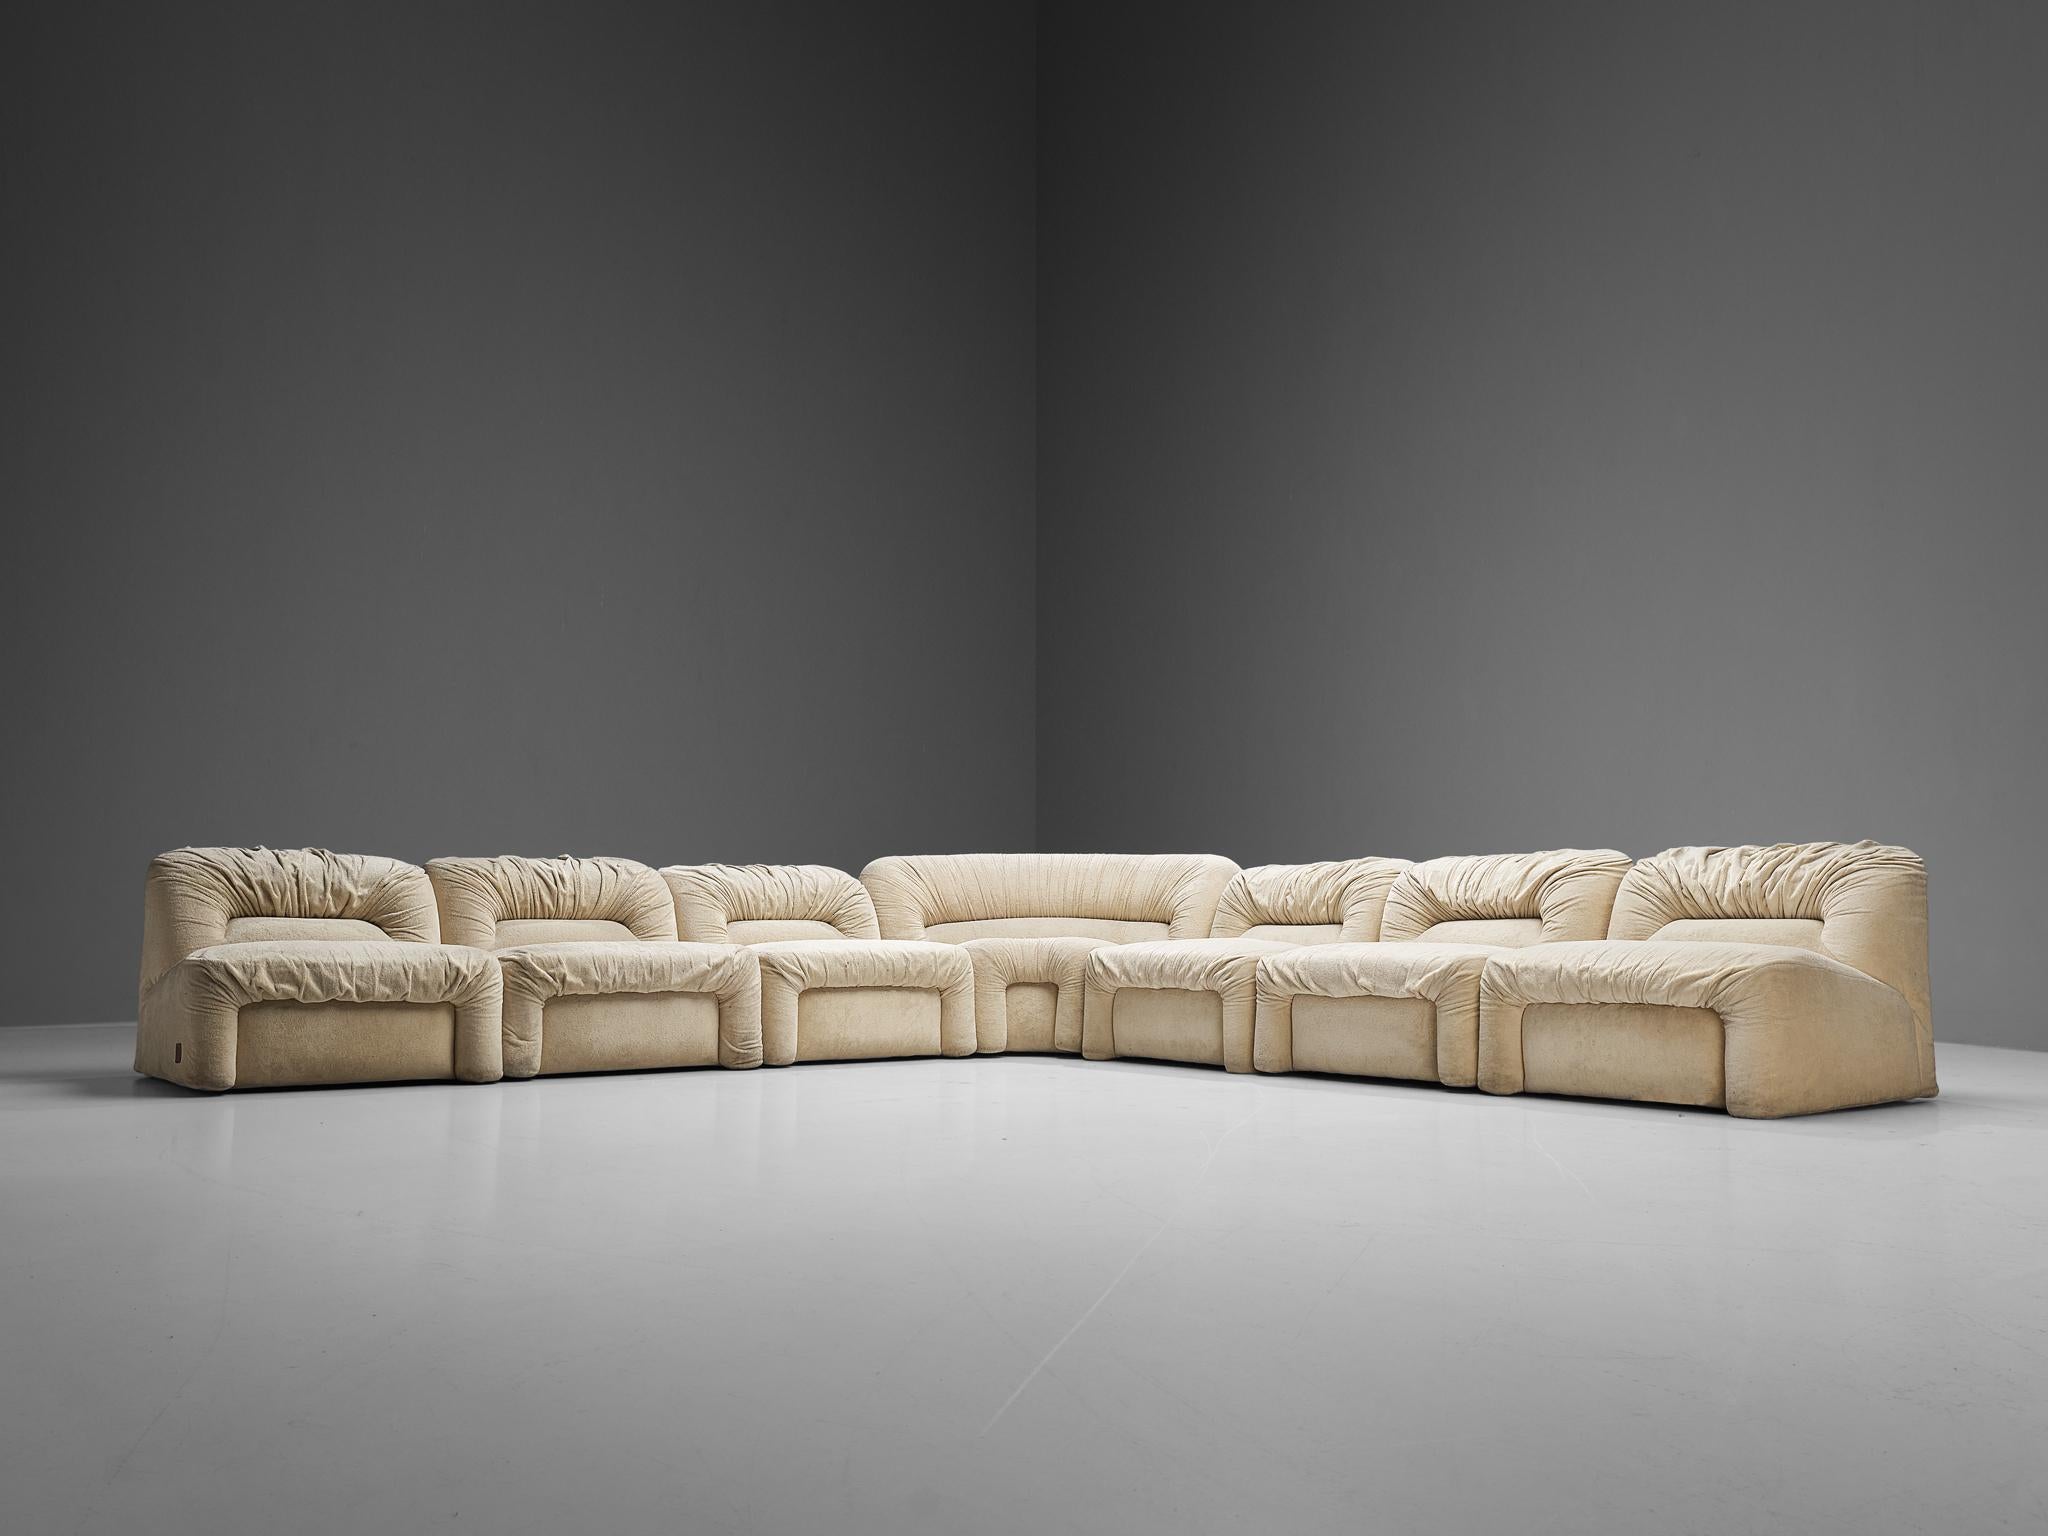 LEV & LEV, modular sofa, fabric, Italy, 1970s.

A splendid sectional sofa in a beige upholstery, made in Italy by manufacturer LEV & LEV in the 1970s. This piece of furniture is designed to provide an ultimate level of comfort due to the thick